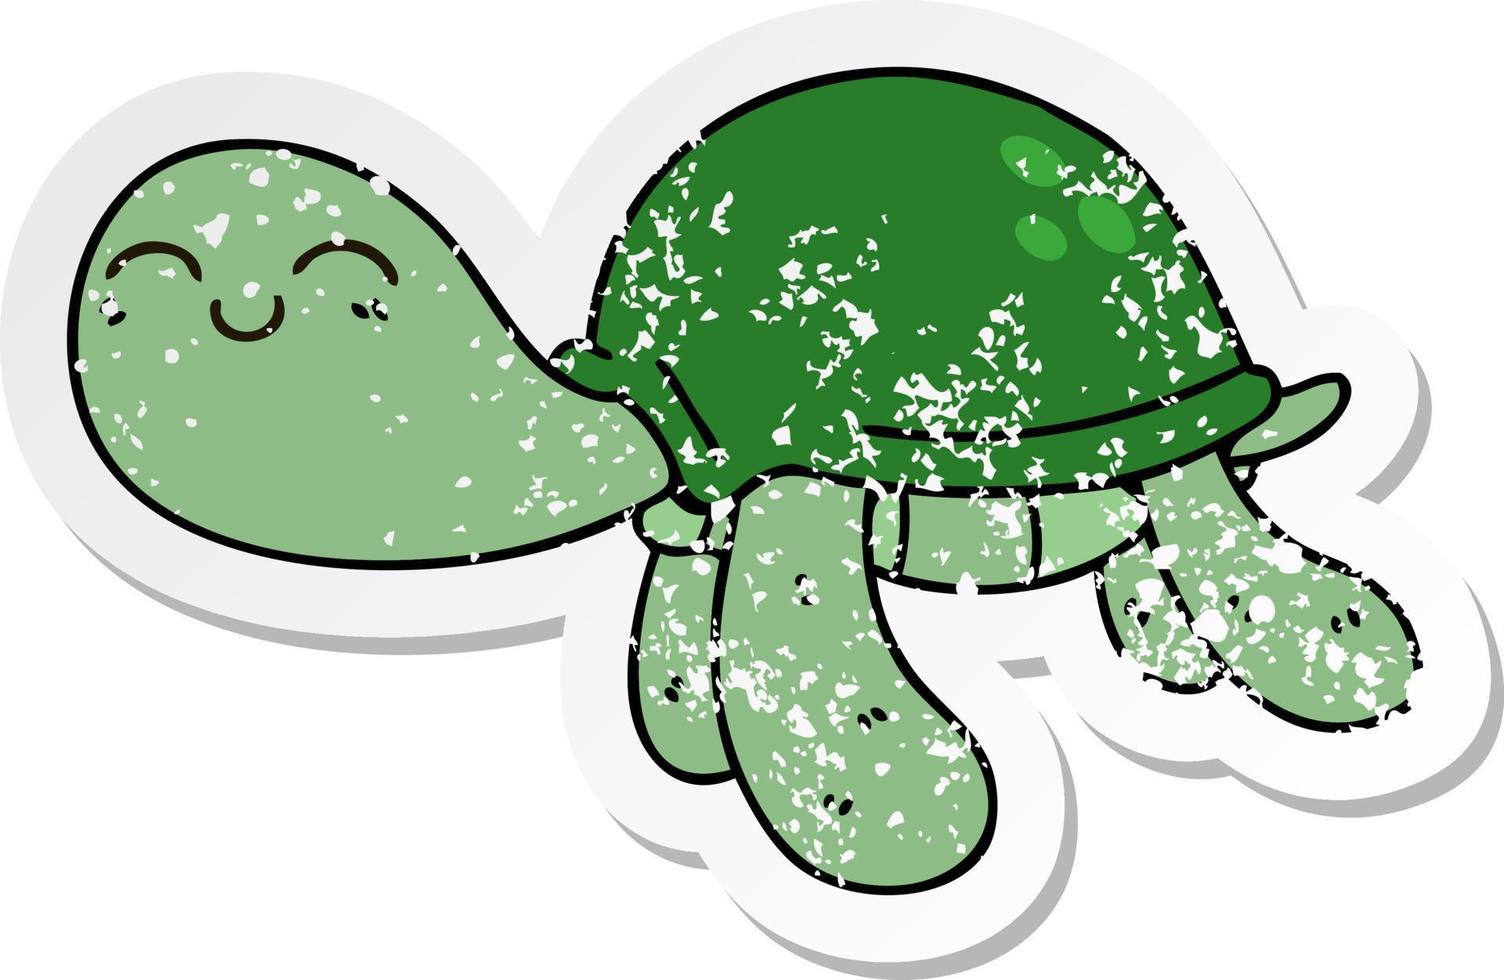 distressed sticker of a quirky hand drawn cartoon turtle vector